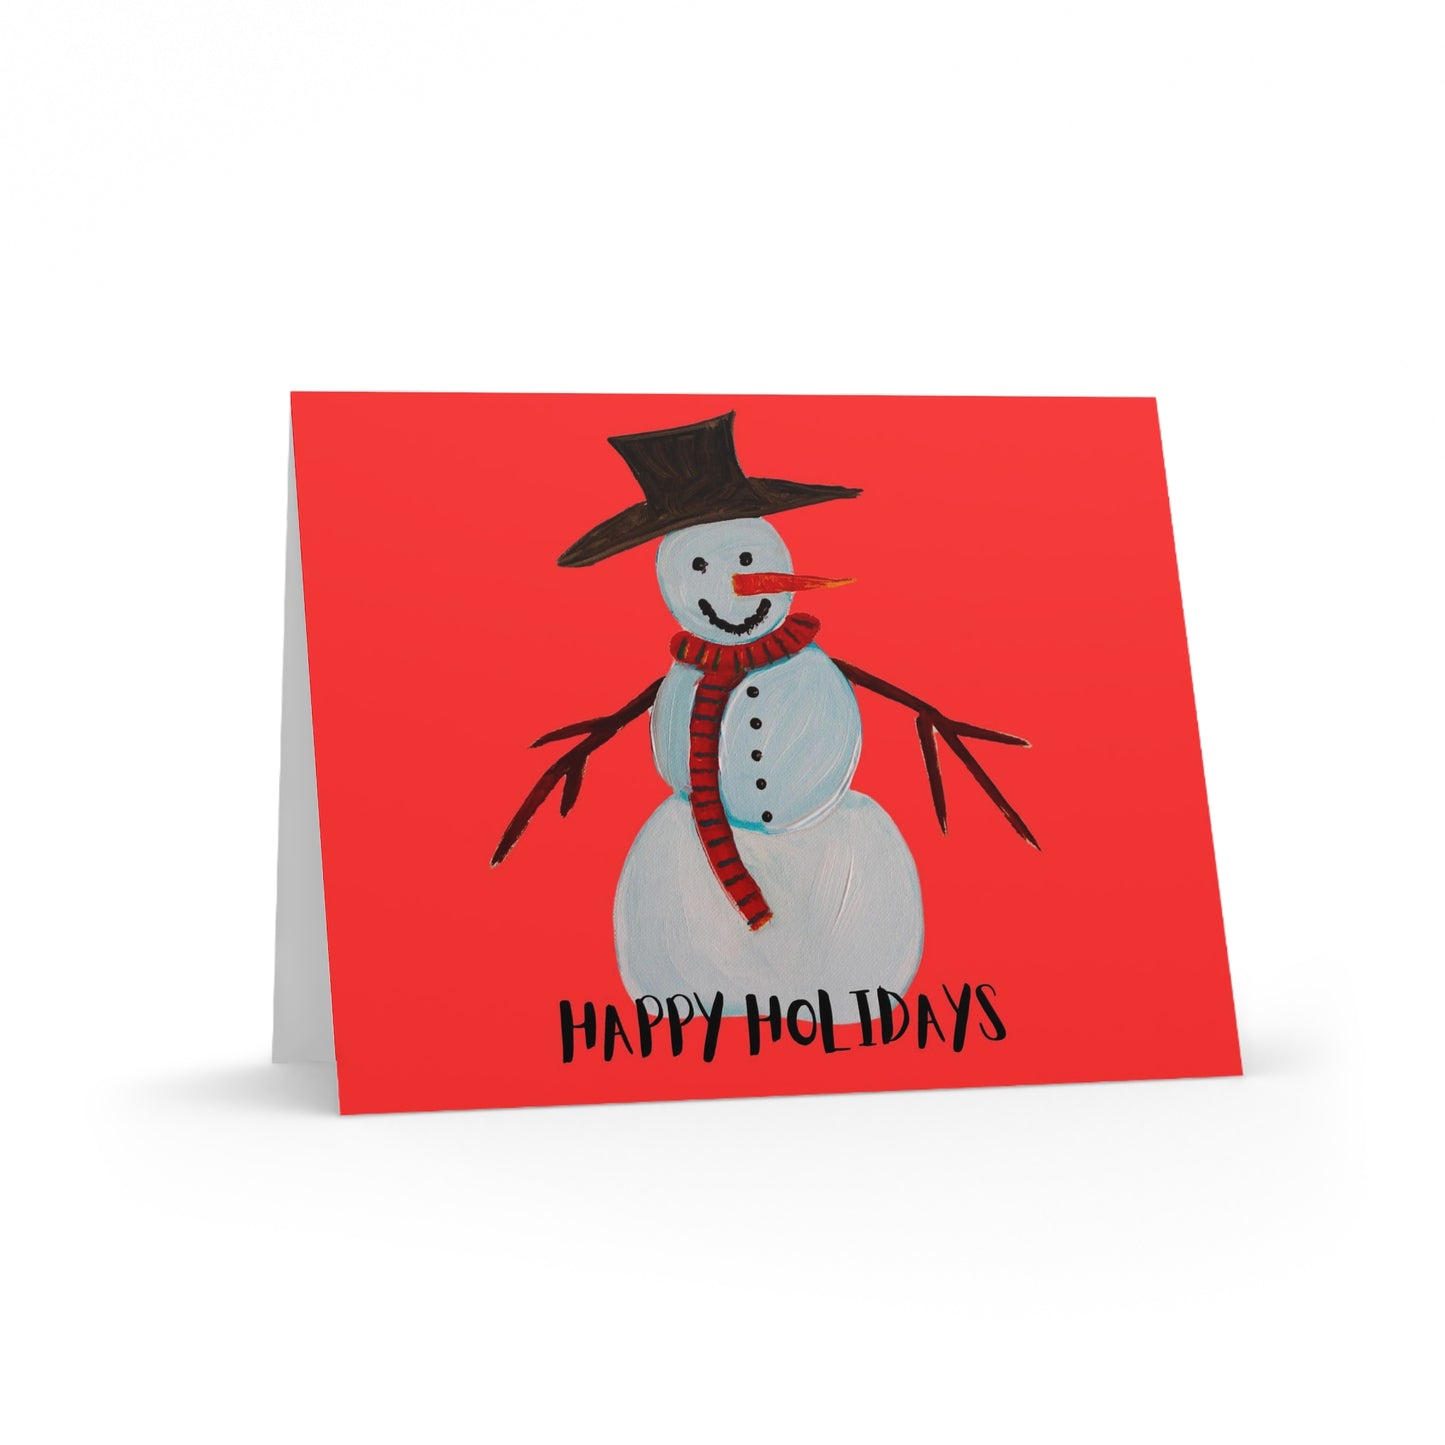 Snowman Holiday Greeting cards (8 pcs) - Holiday cards - Christmas cards